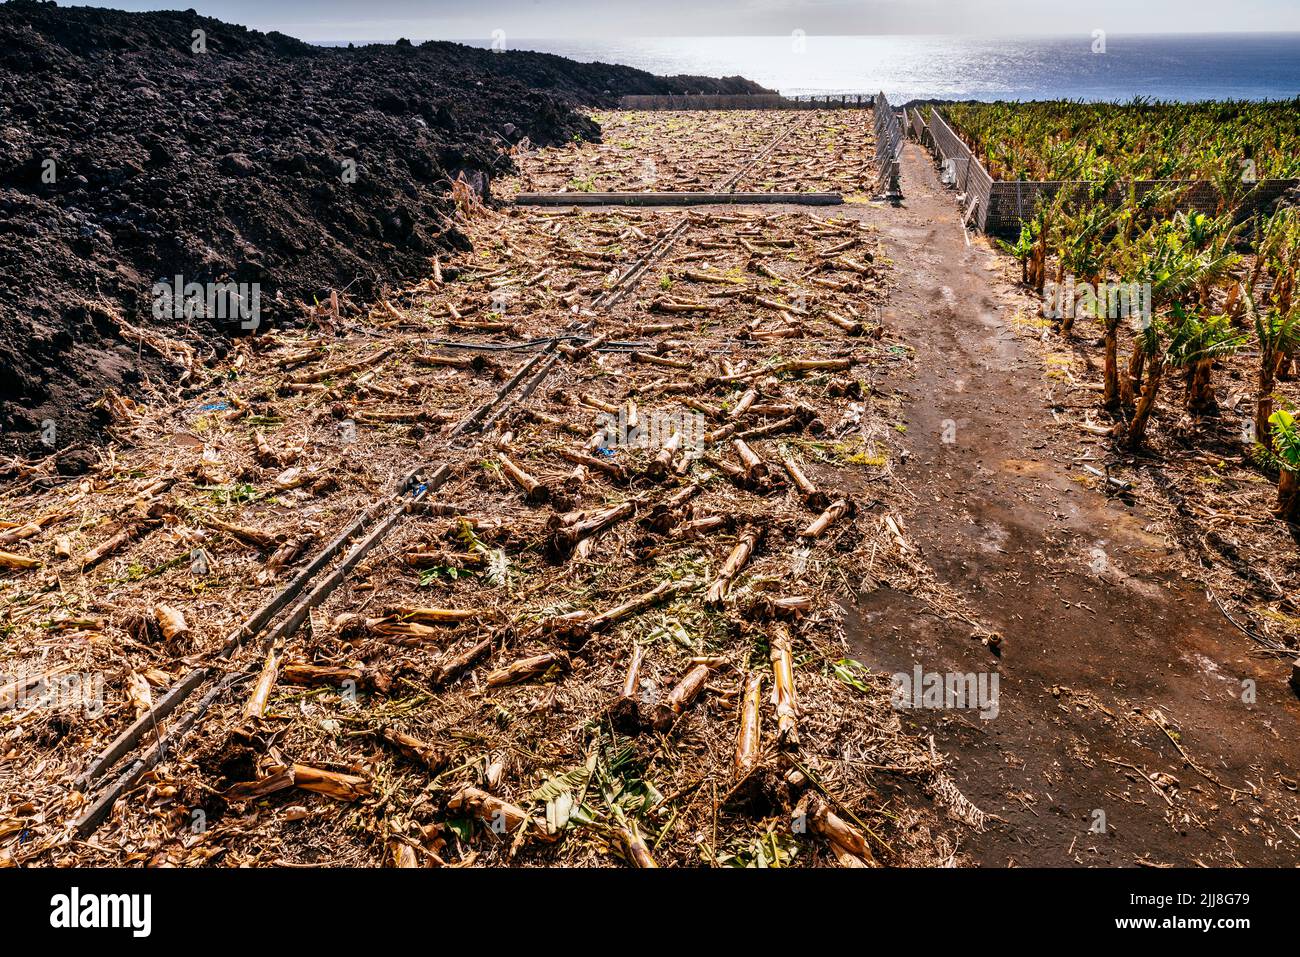 Canary banana plantation destroyed by lava flow. Destruction caused by the lava river in the Aridane Valley. La Palma, Canary Islands, Spain Stock Photo